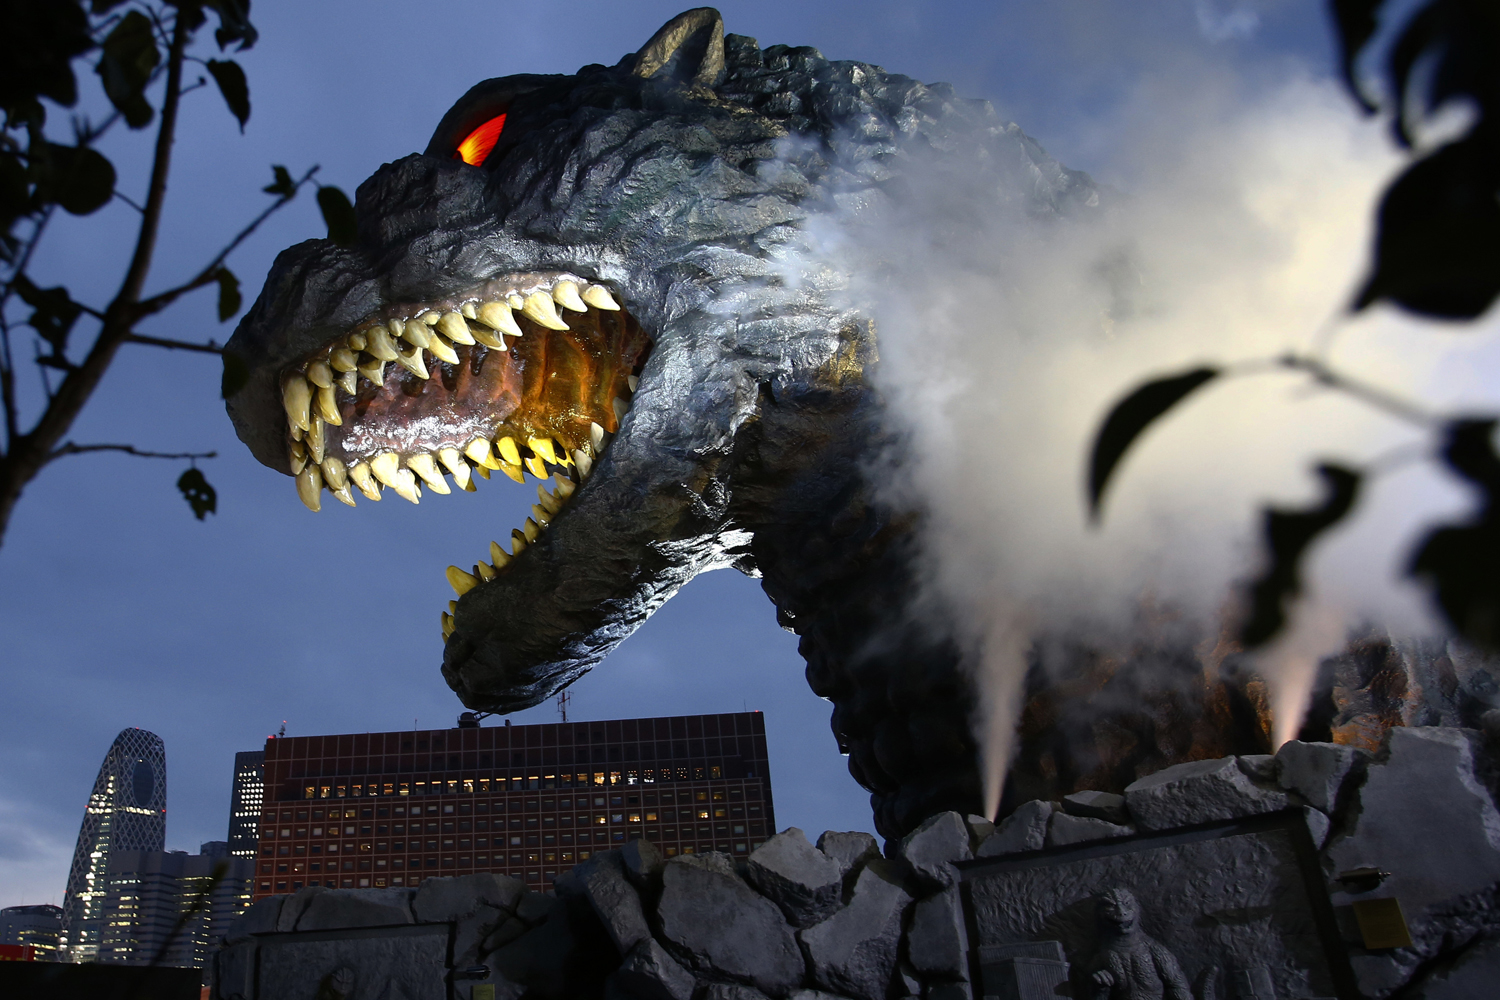 Godzilla's head was unveiled after the monster became a special resident and ambassador for Tokyo on Thursday.